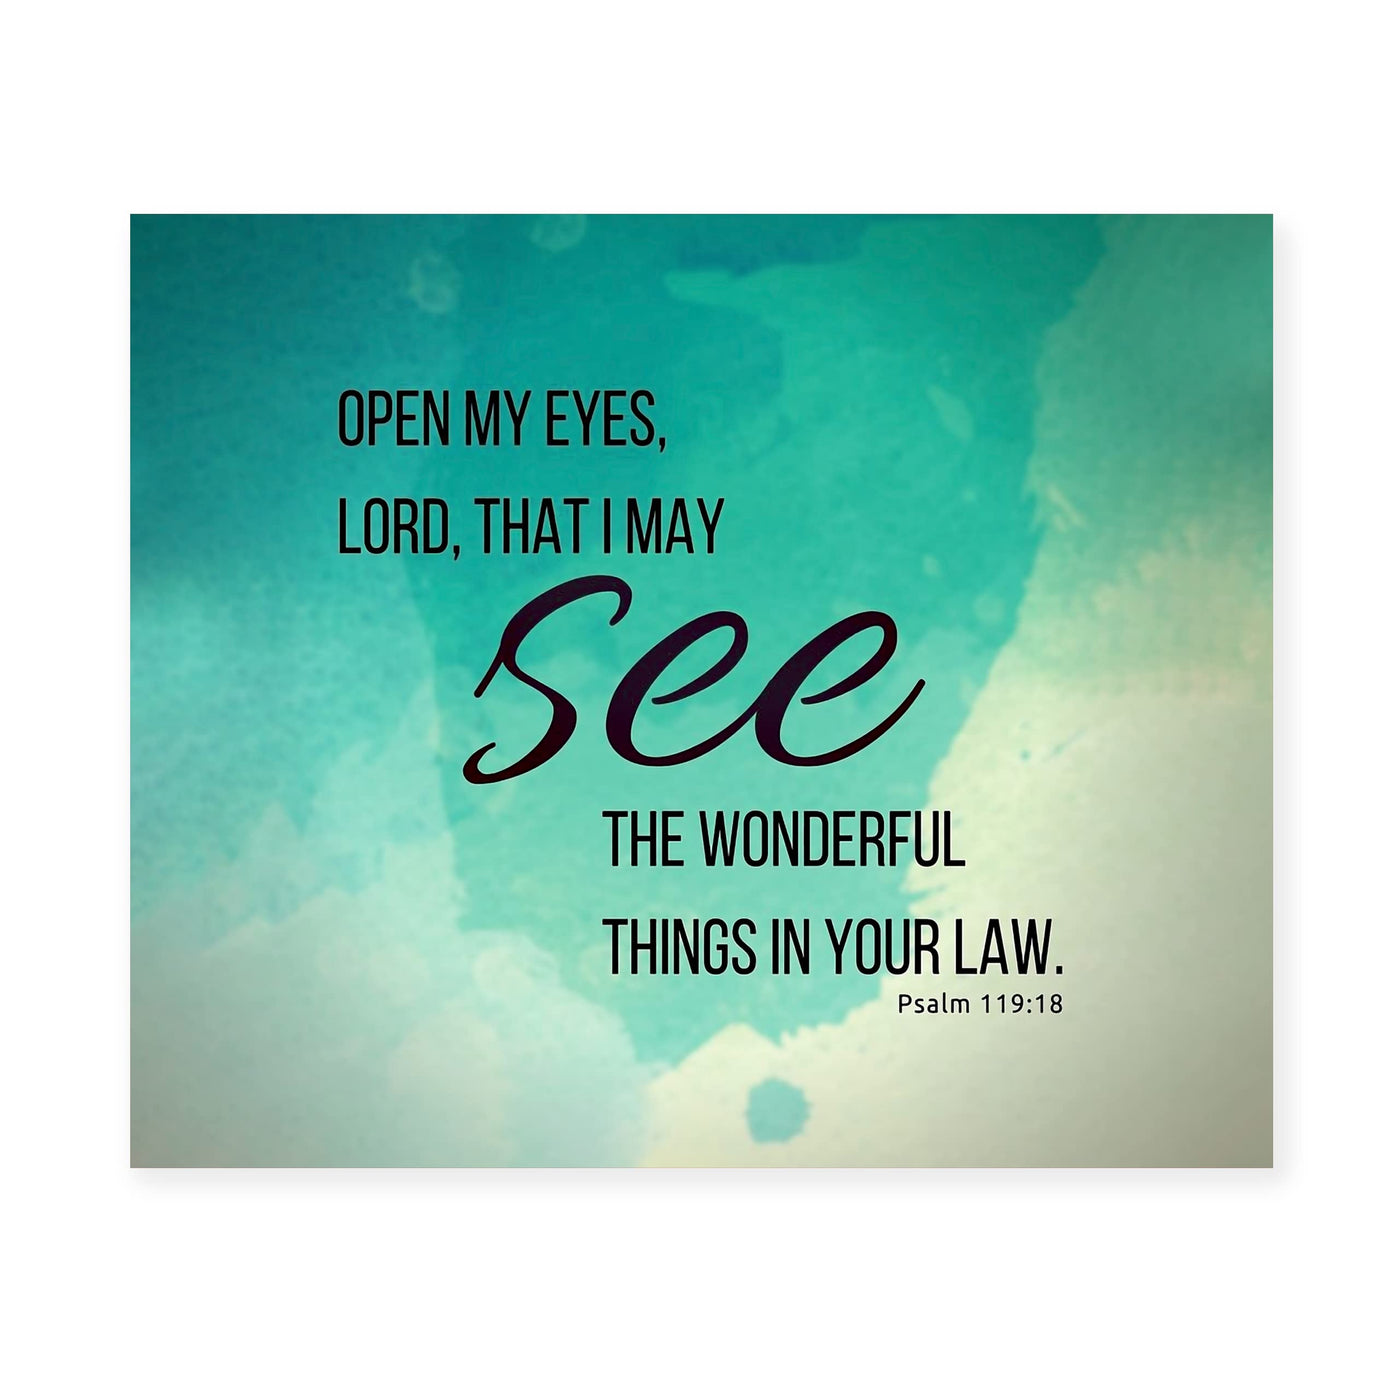 Psalm 119:18-"Open My Eyes, Lord, That I May See"-Bible Verse Wall Art -10x8" Inspirational Scripture Print-Ready to Frame. Christian Home-Office-Church Decor & Faith-Religious Gifts!